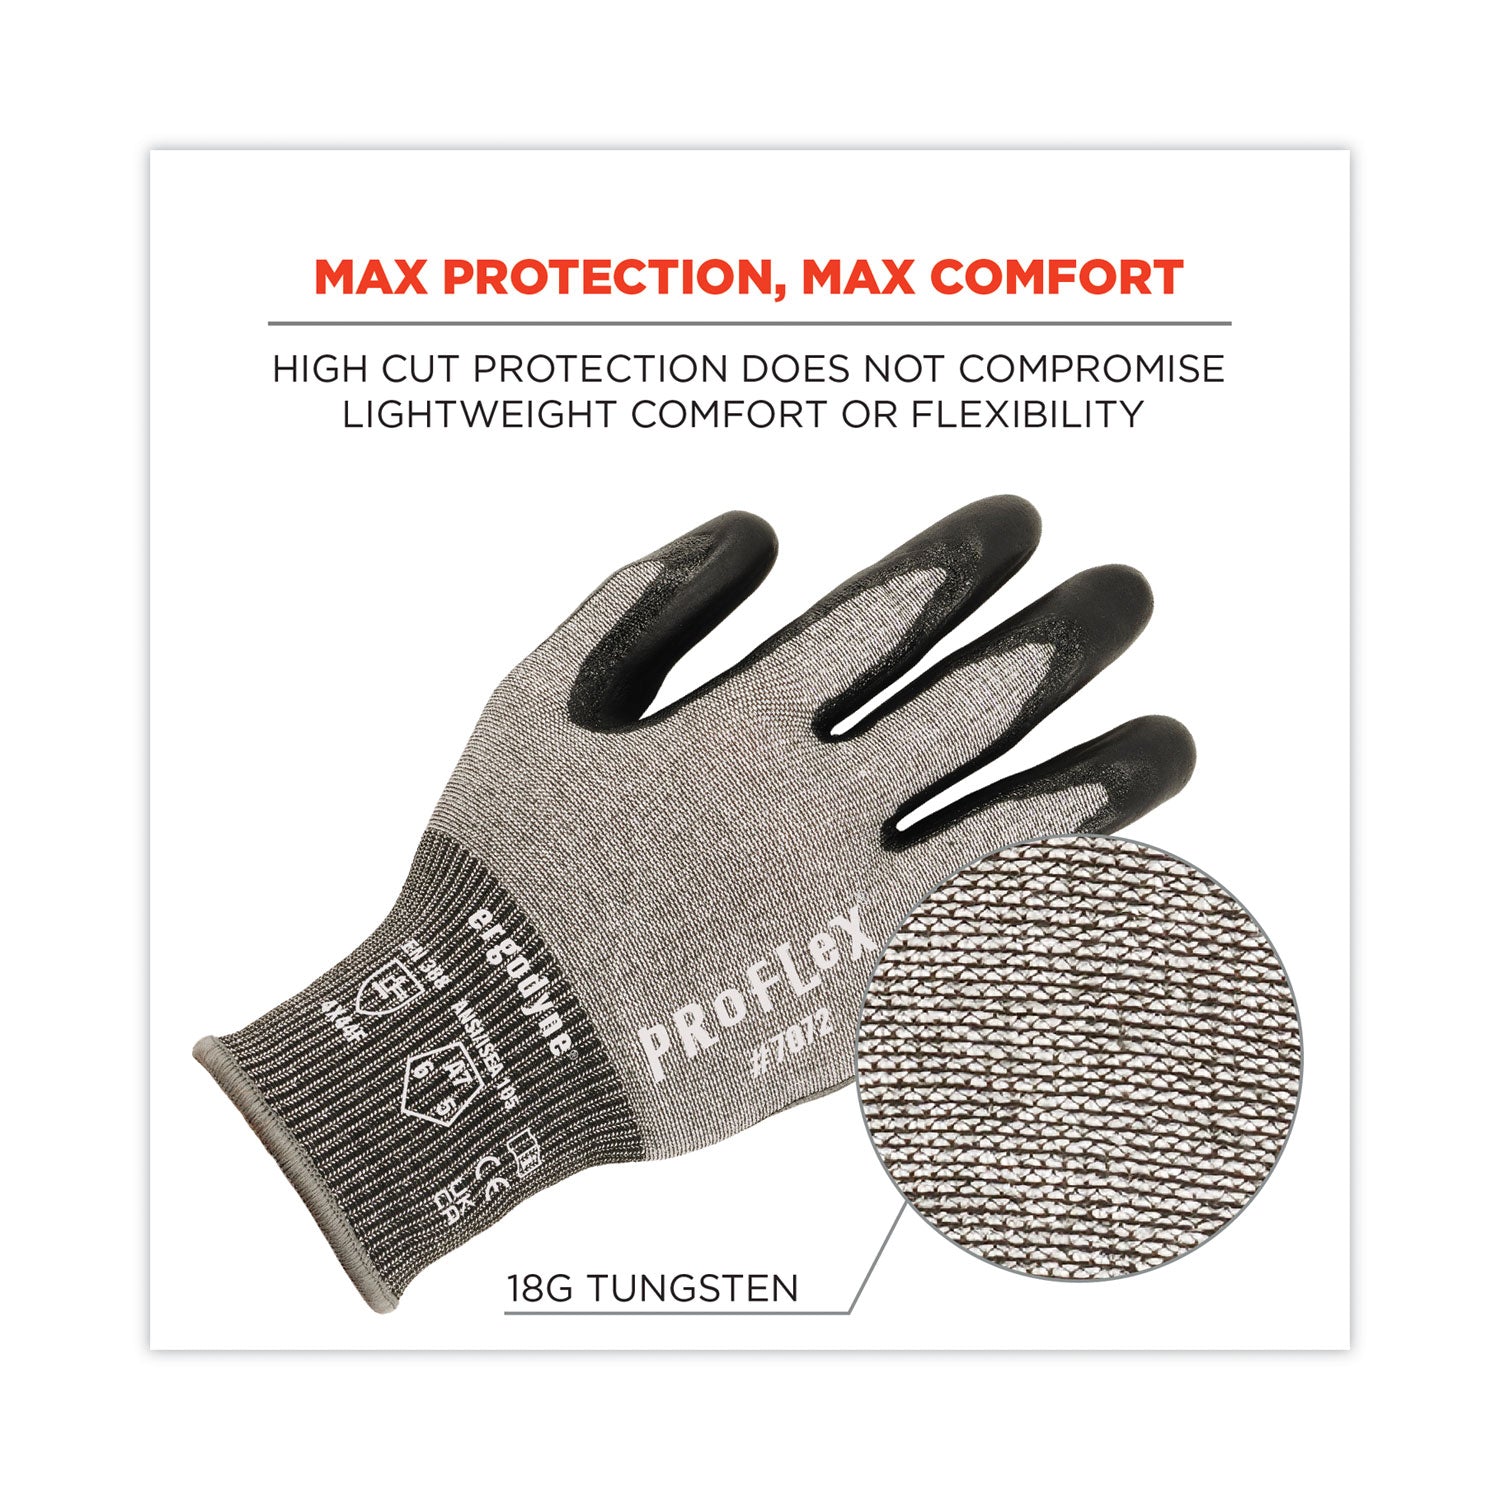 proflex-7072-ansi-a7-nitrile-coated-cr-gloves-gray-large-pair-ships-in-1-3-business-days_ego10314 - 2